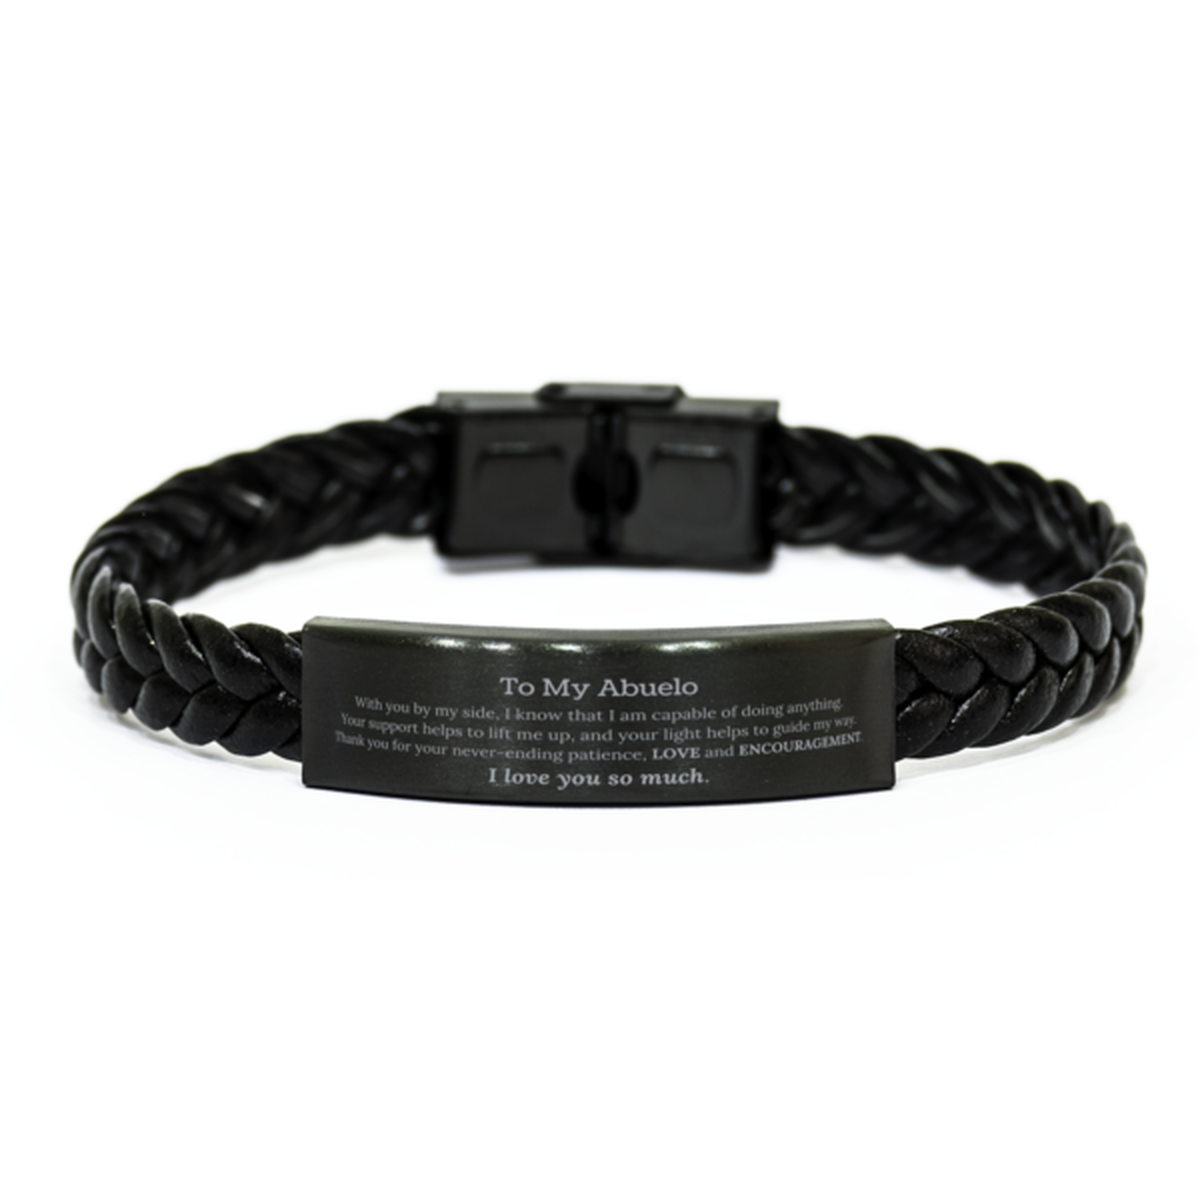 Appreciation Abuelo Braided Leather Bracelet Gifts, To My Abuelo Birthday Christmas Wedding Keepsake Gifts for Abuelo With you by my side, I know that I am capable of doing anything. I love you so much